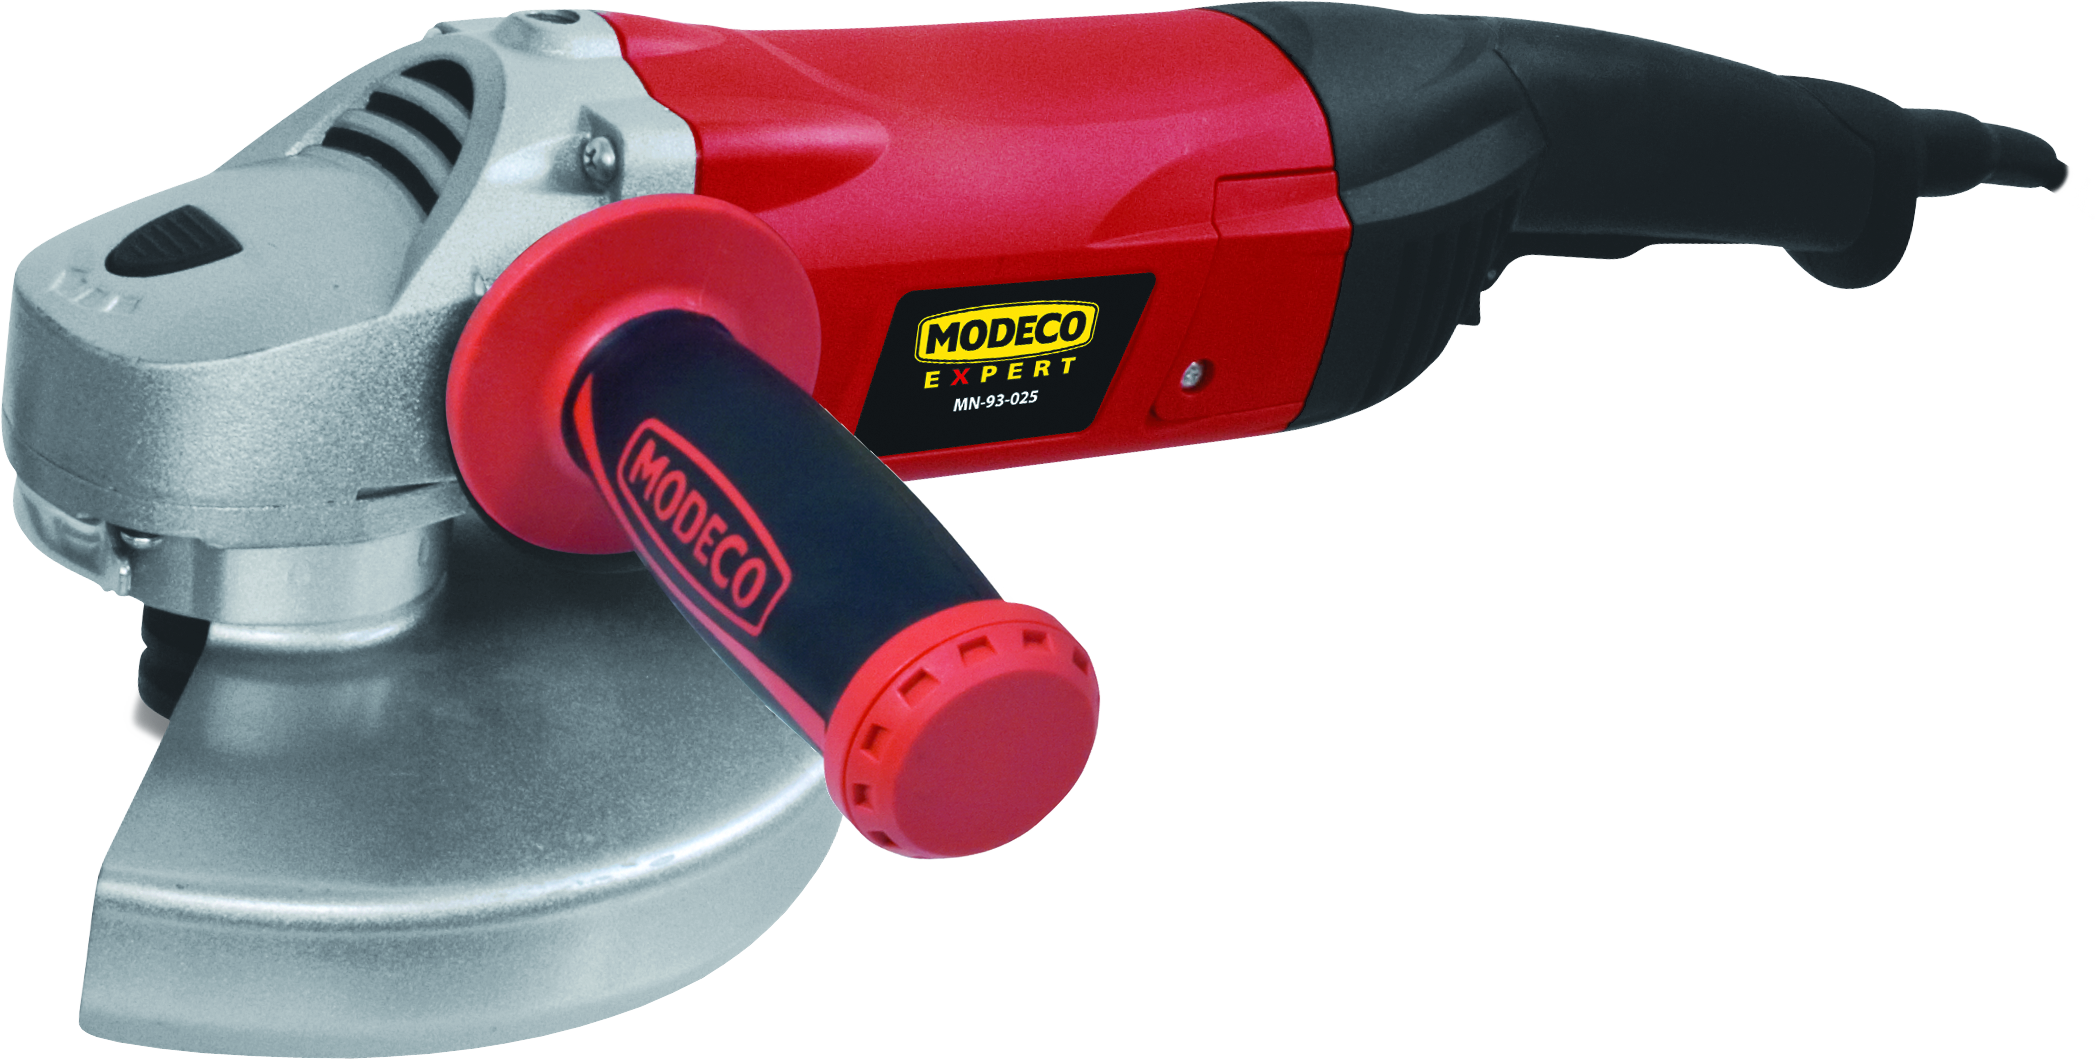 MN-93-025 Angle grinder 230 mm, 2300 W